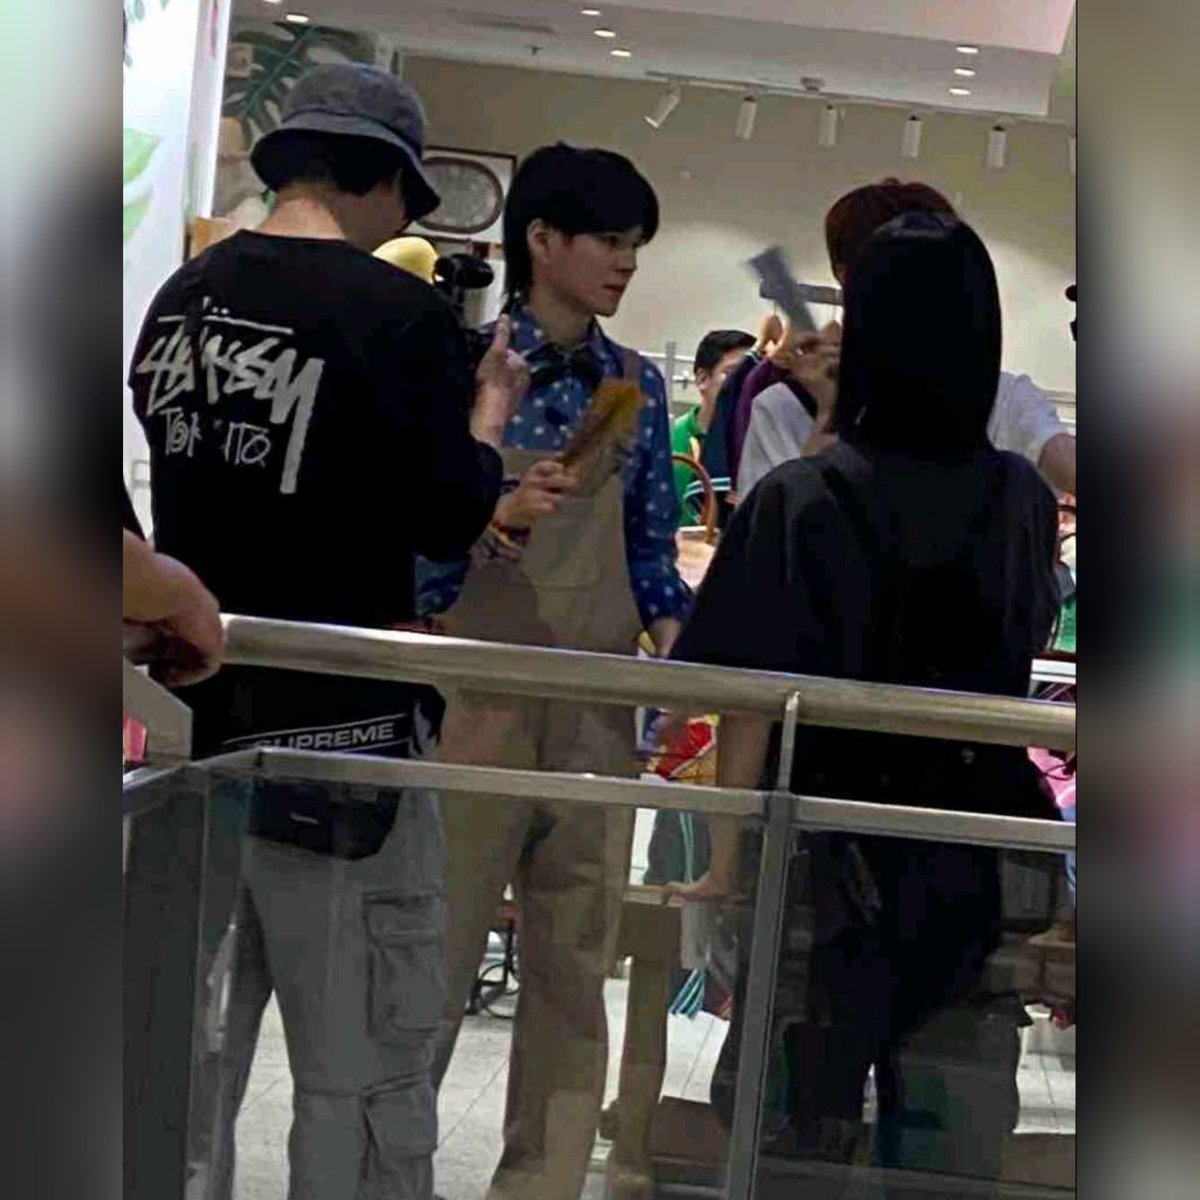 Spotted: TREASURE's YOSHI vlogging in the mall. Are you ready this weekend for more surprises? #TREASURE_REBOOT_IN_MANILA tickets available via SM Tickets.